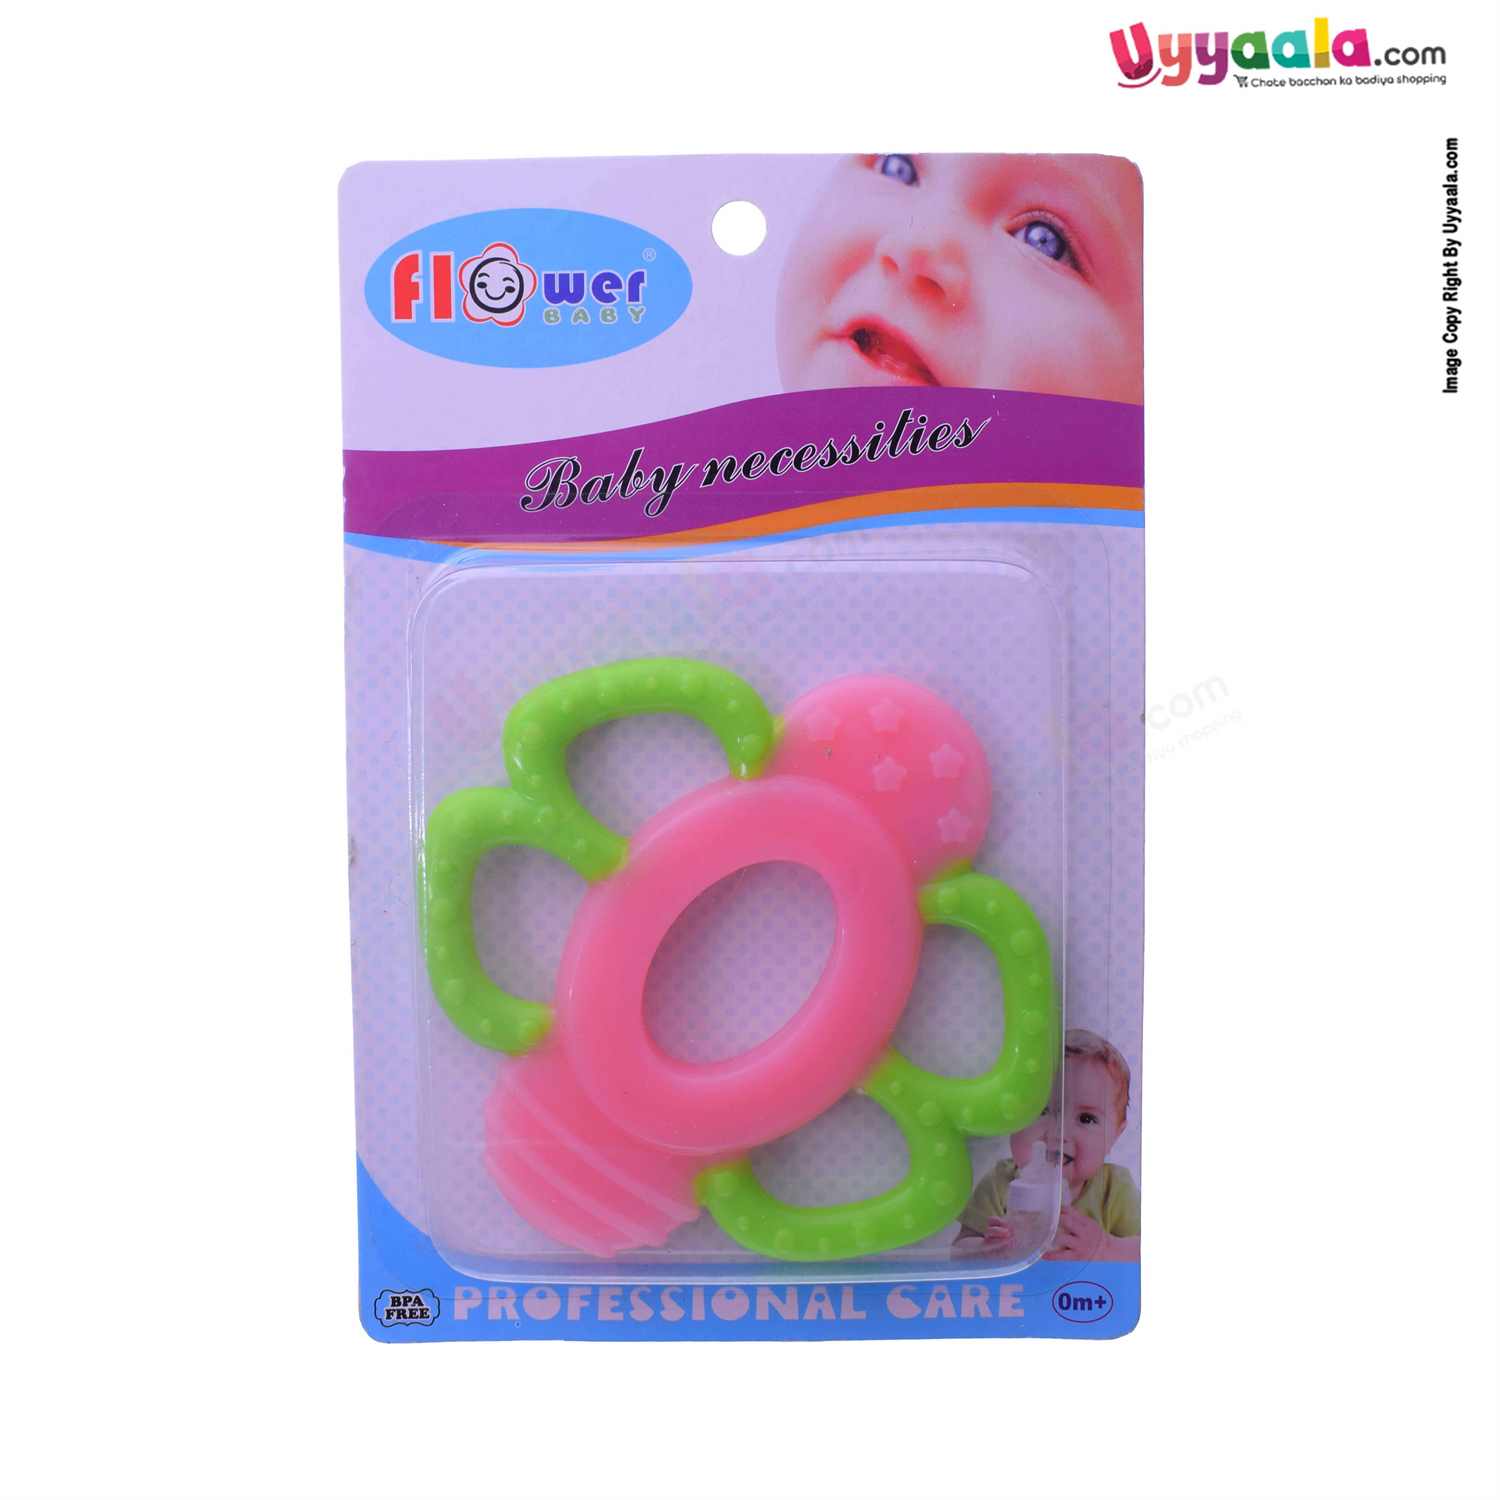 FLOWER BABY Silicone Teether For Babies Butterfly Shape 0+m Age - Pink, Green